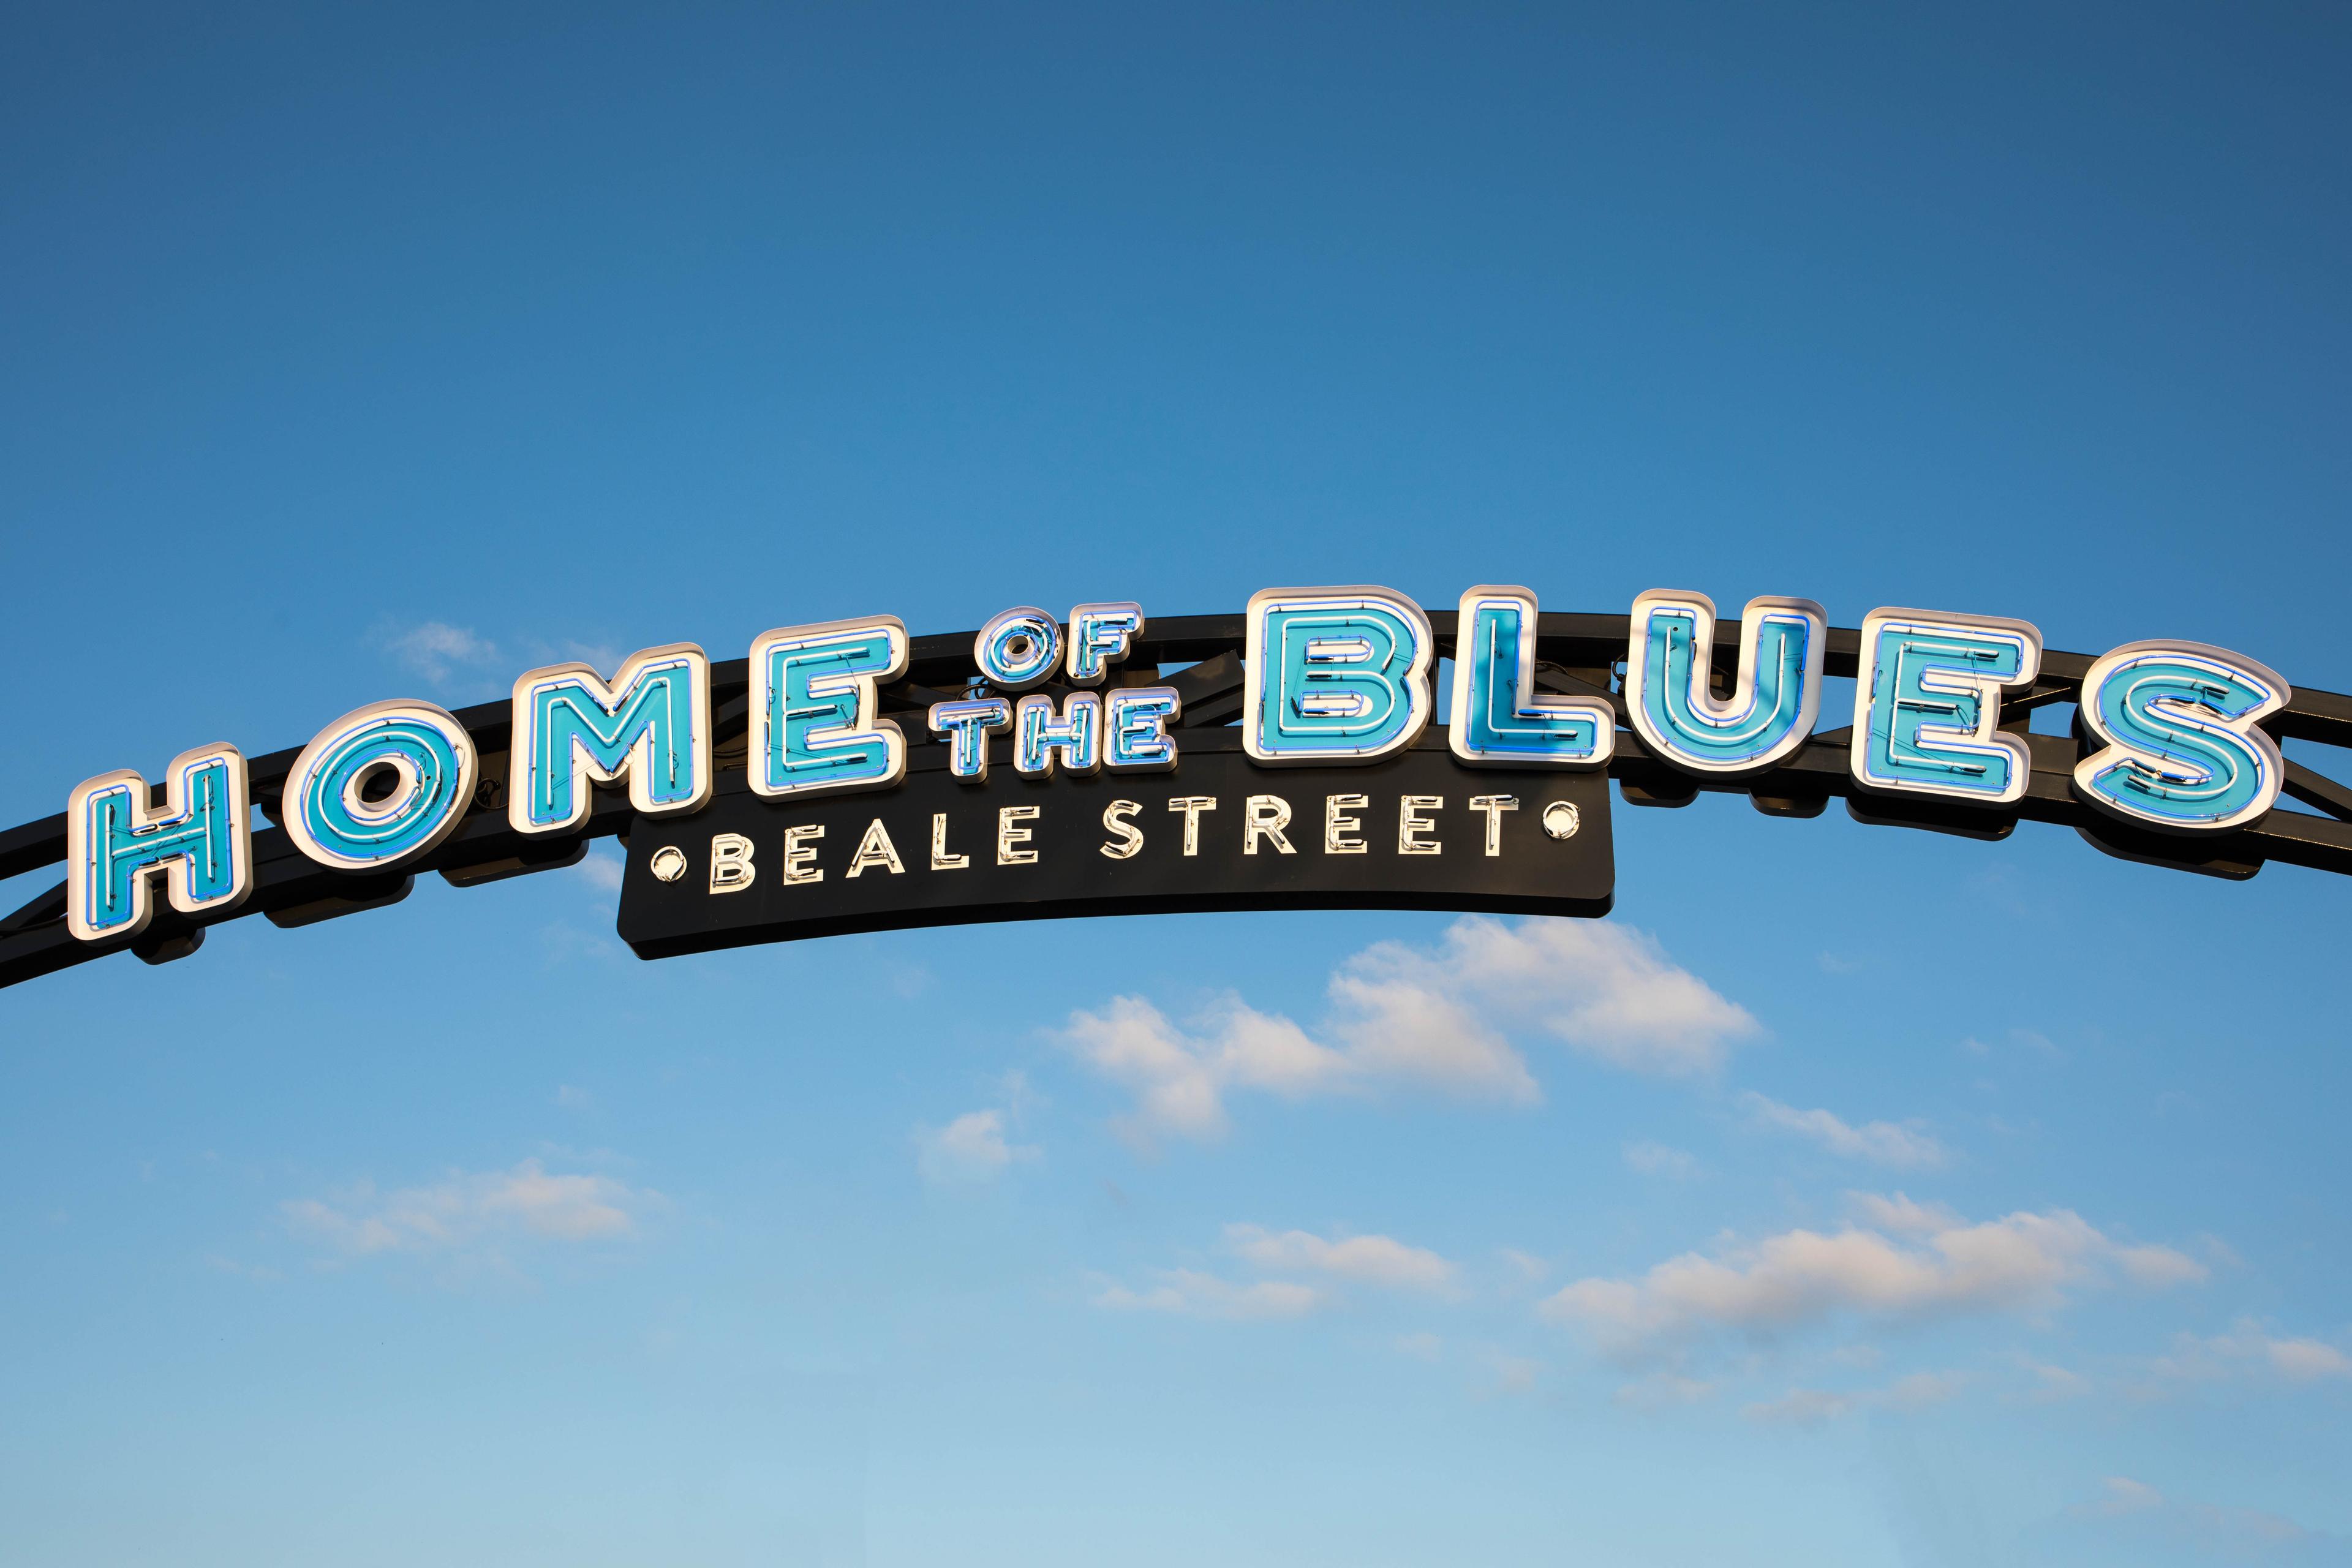 Sign over Beale Street, Memphis, Tennessee saying "Home of the Blues"